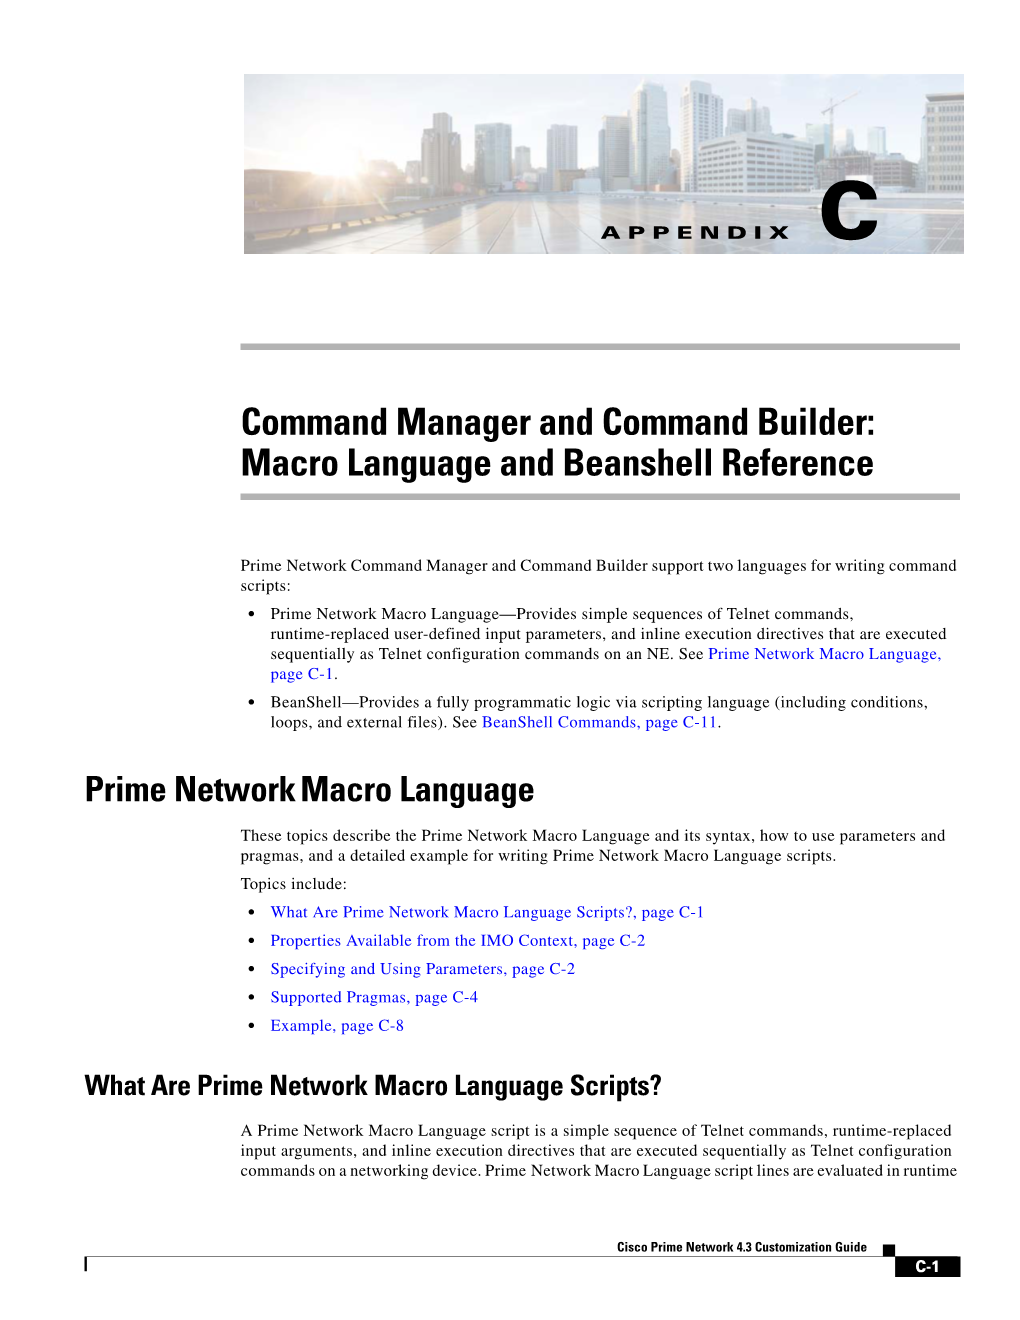 Command Manager and Command Builder: Macro Language and Beanshell Reference